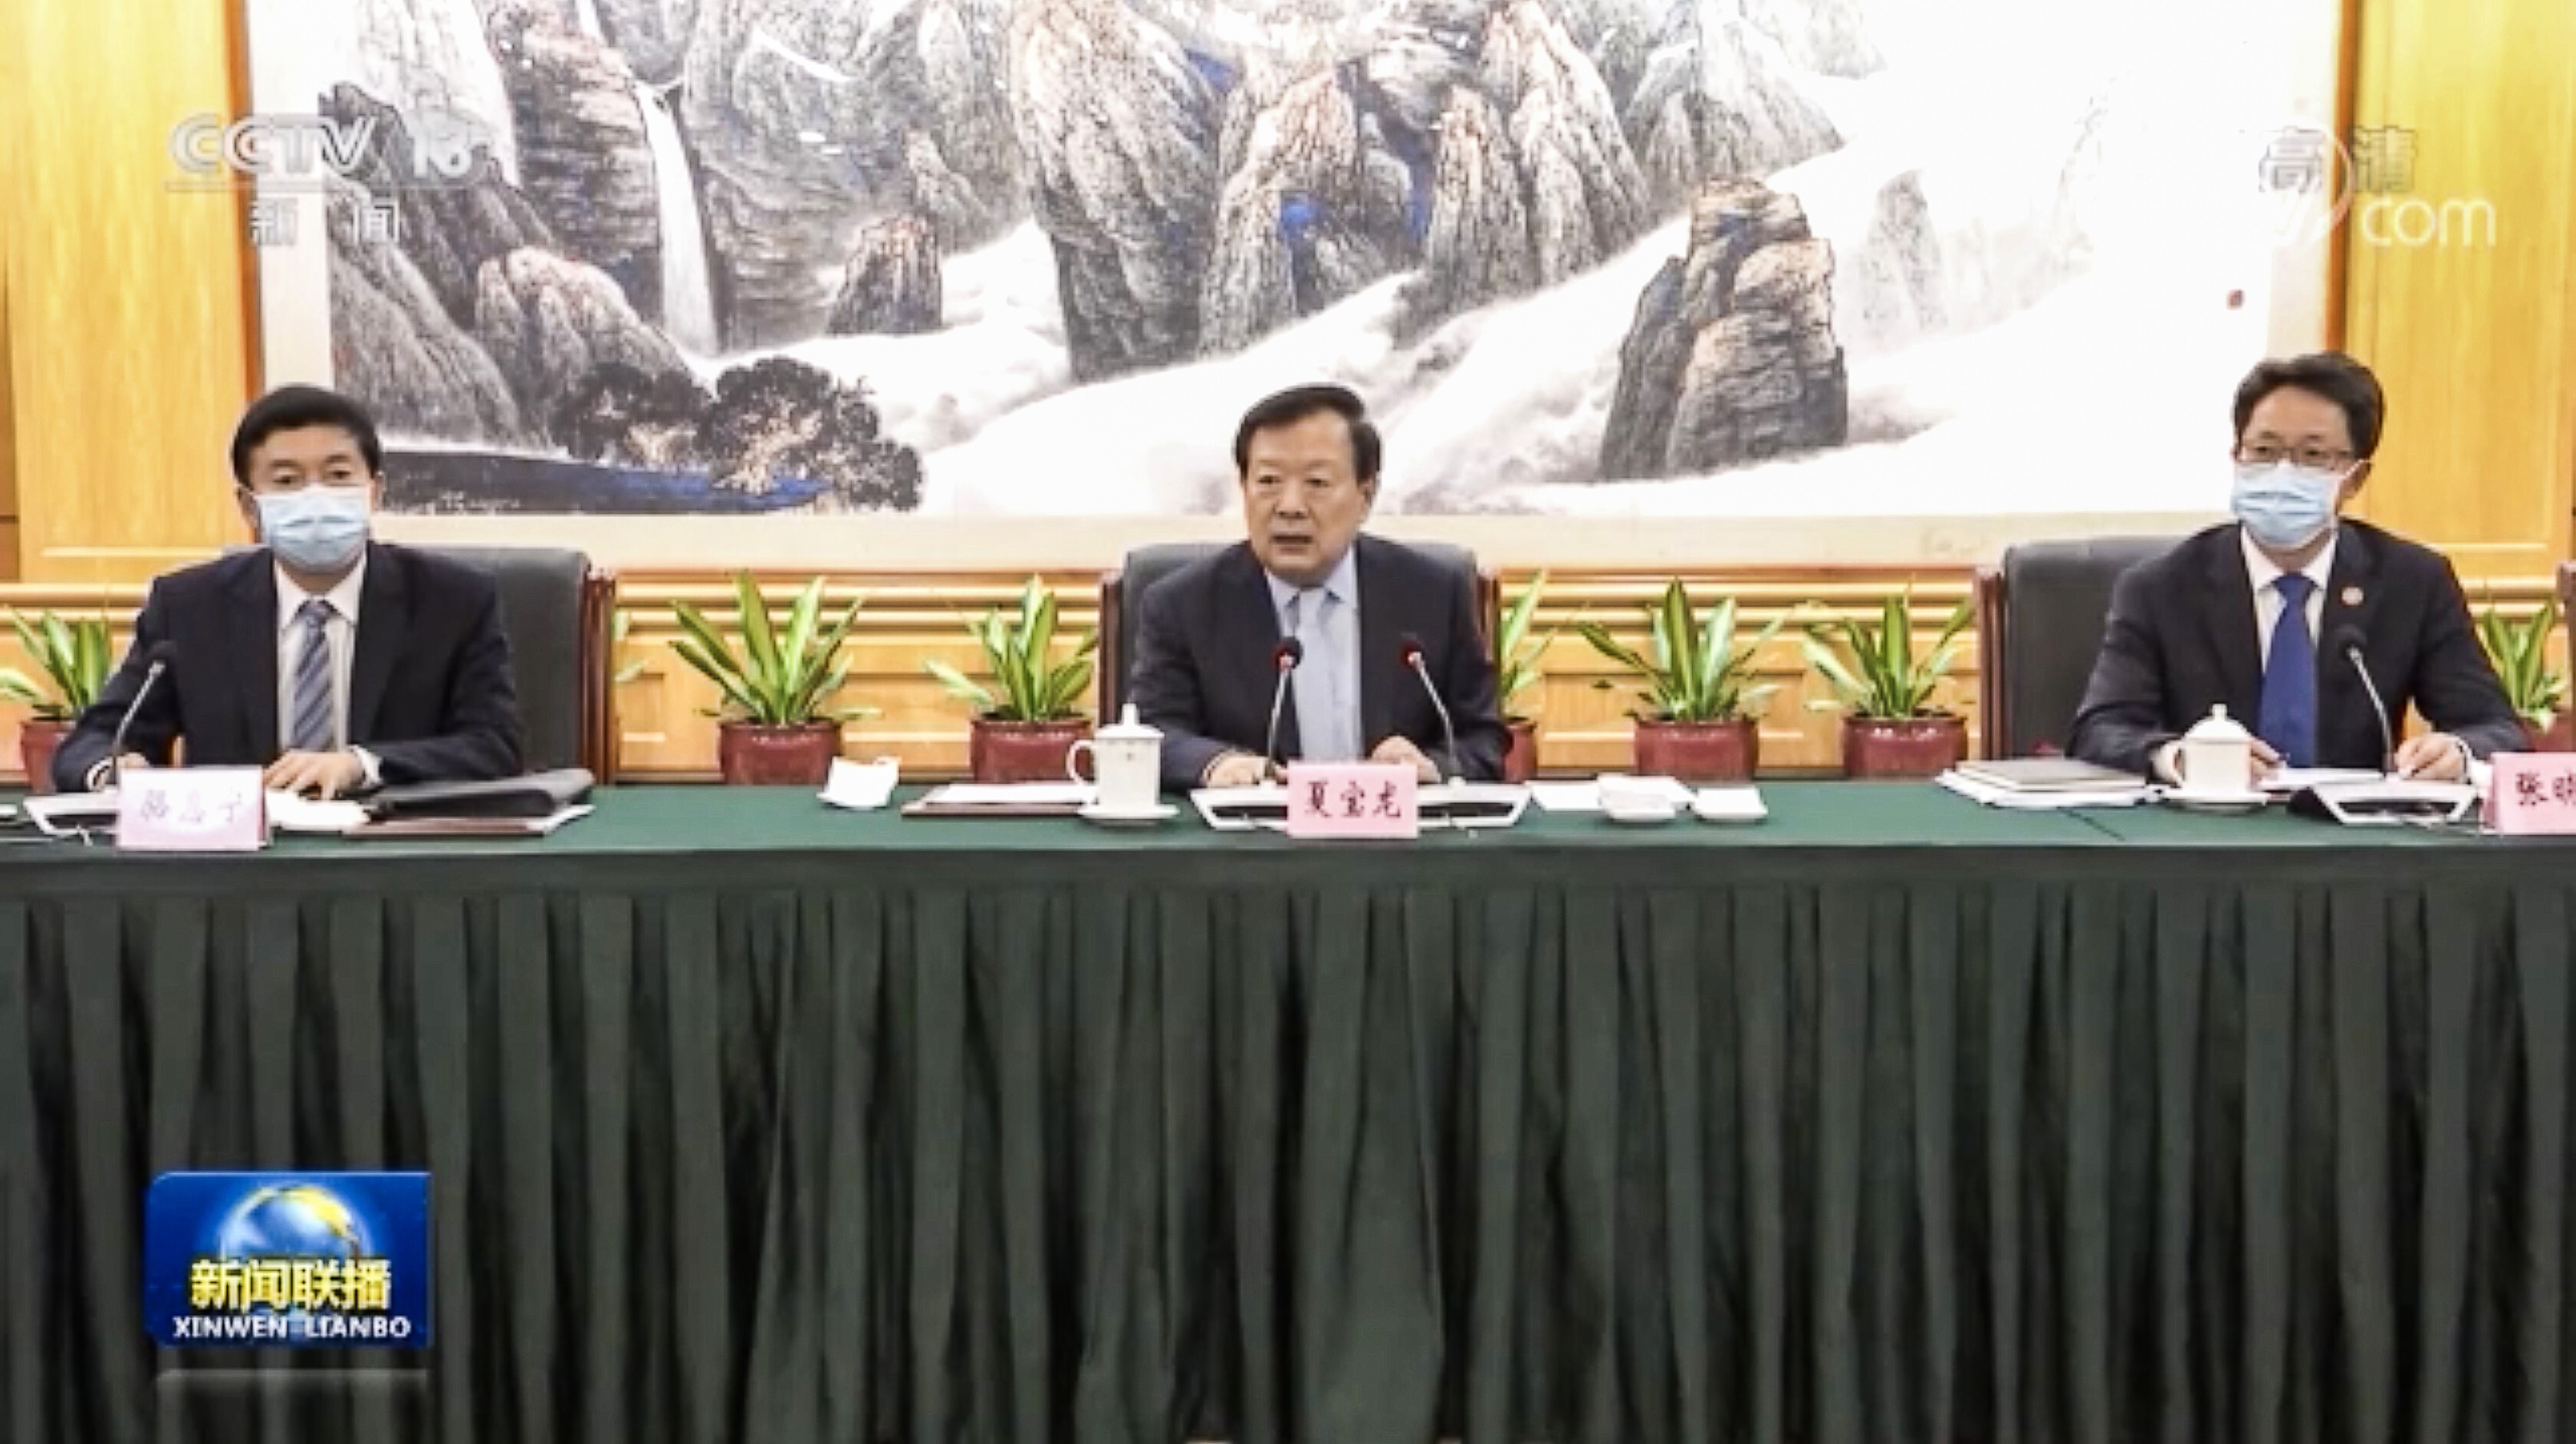 Xia Baolong (centre), director of the State Council’s Hong Kong and Macau Affairs Office, attends a seminar with pro-establishment figures in Shenzhen on Monday. Photo: CCTV